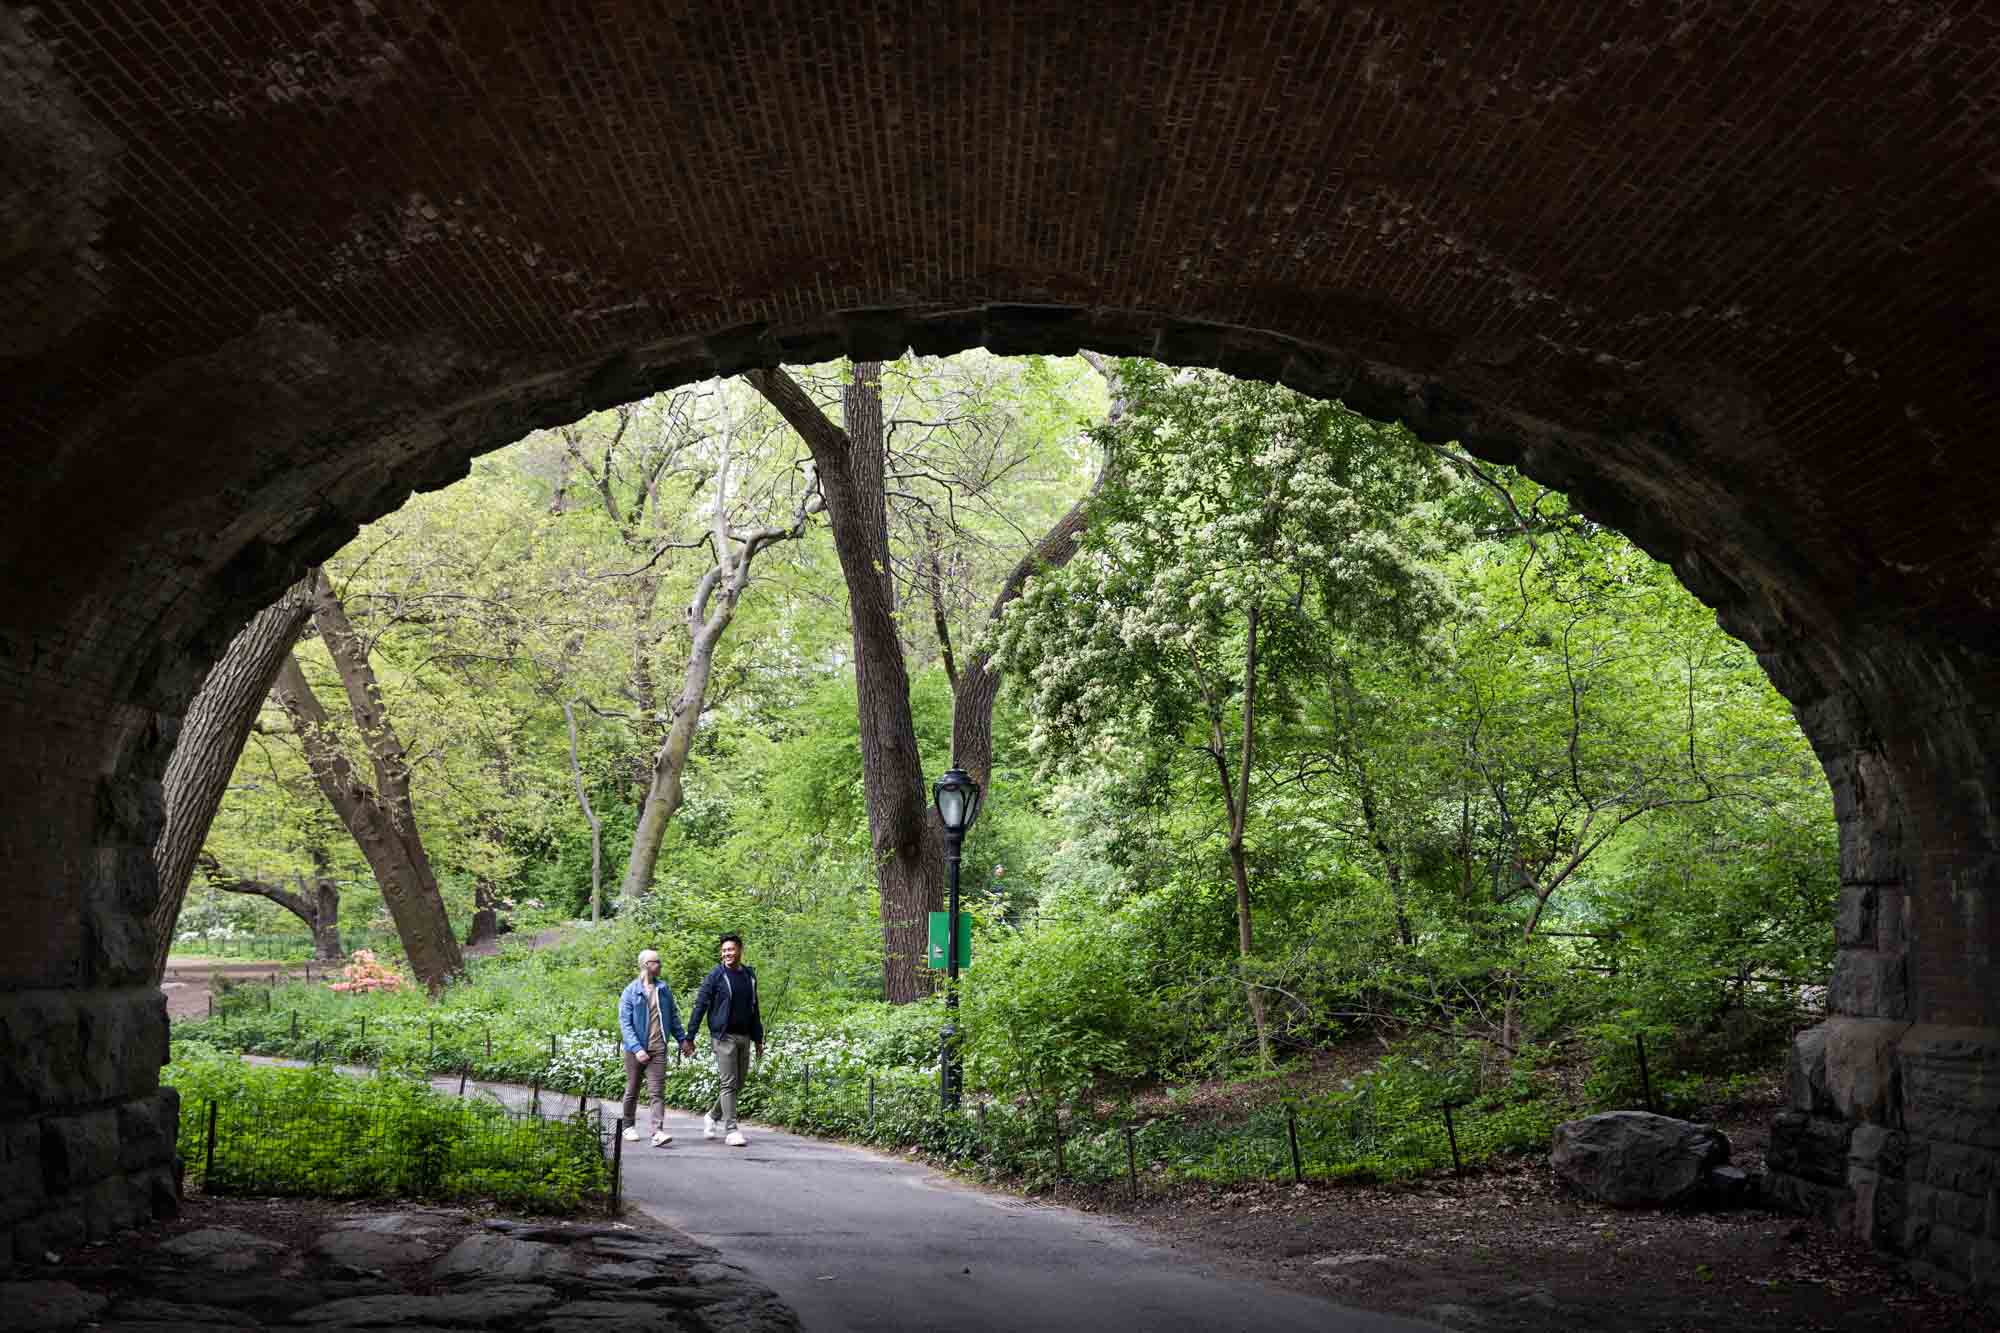 Two men walking on pathway under bridge from a Central Park engagement photo shoot